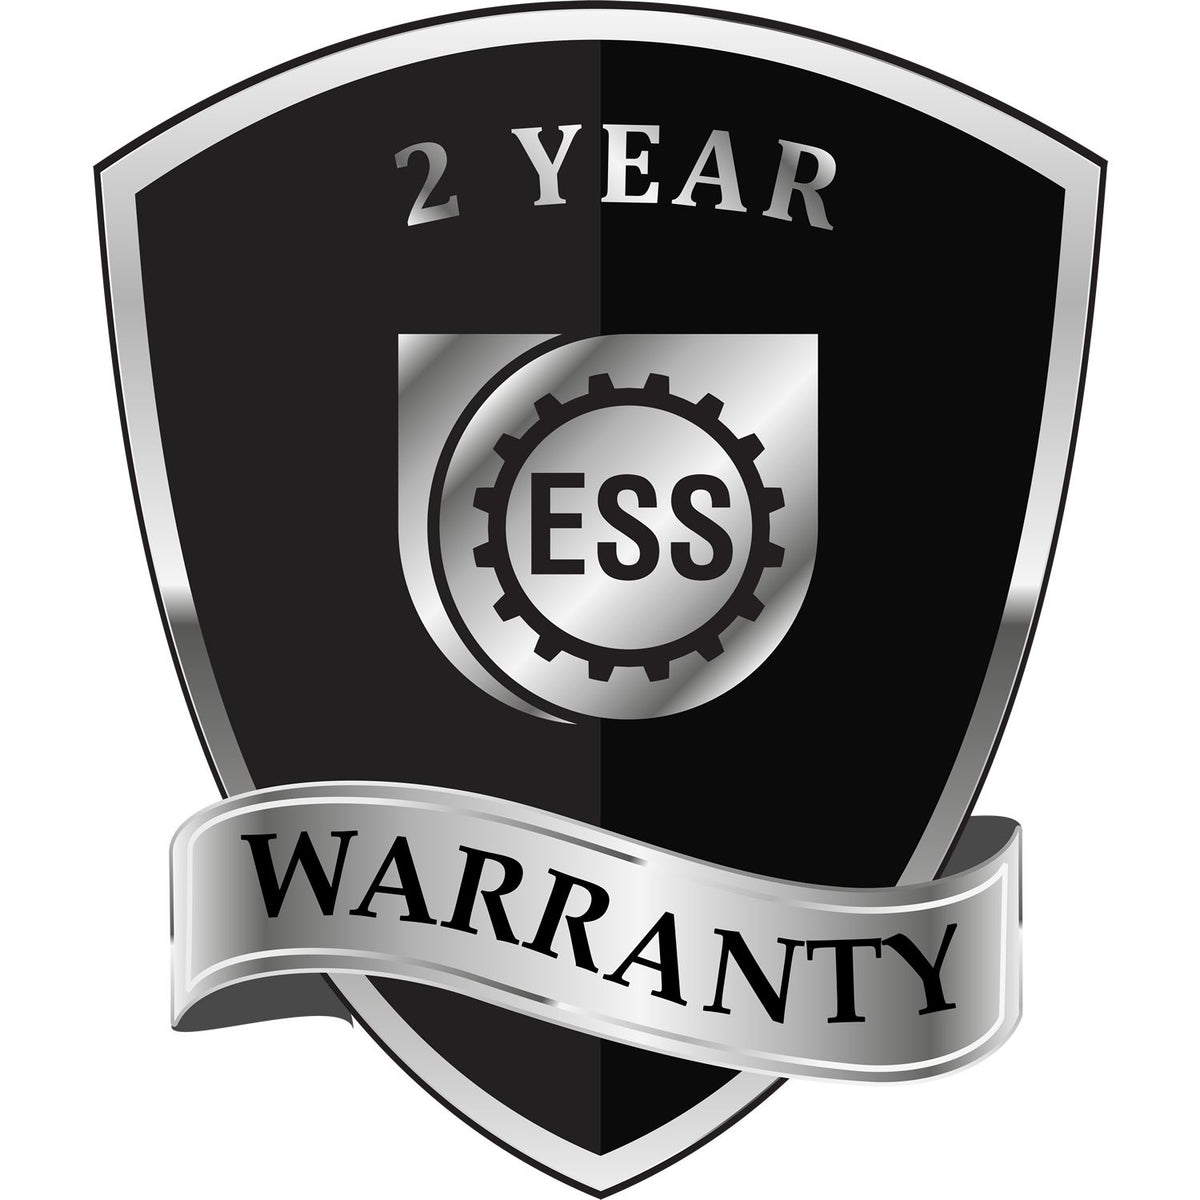 A black and silver badge or emblem showing warranty information for the Long Reach Vermont Geology Seal